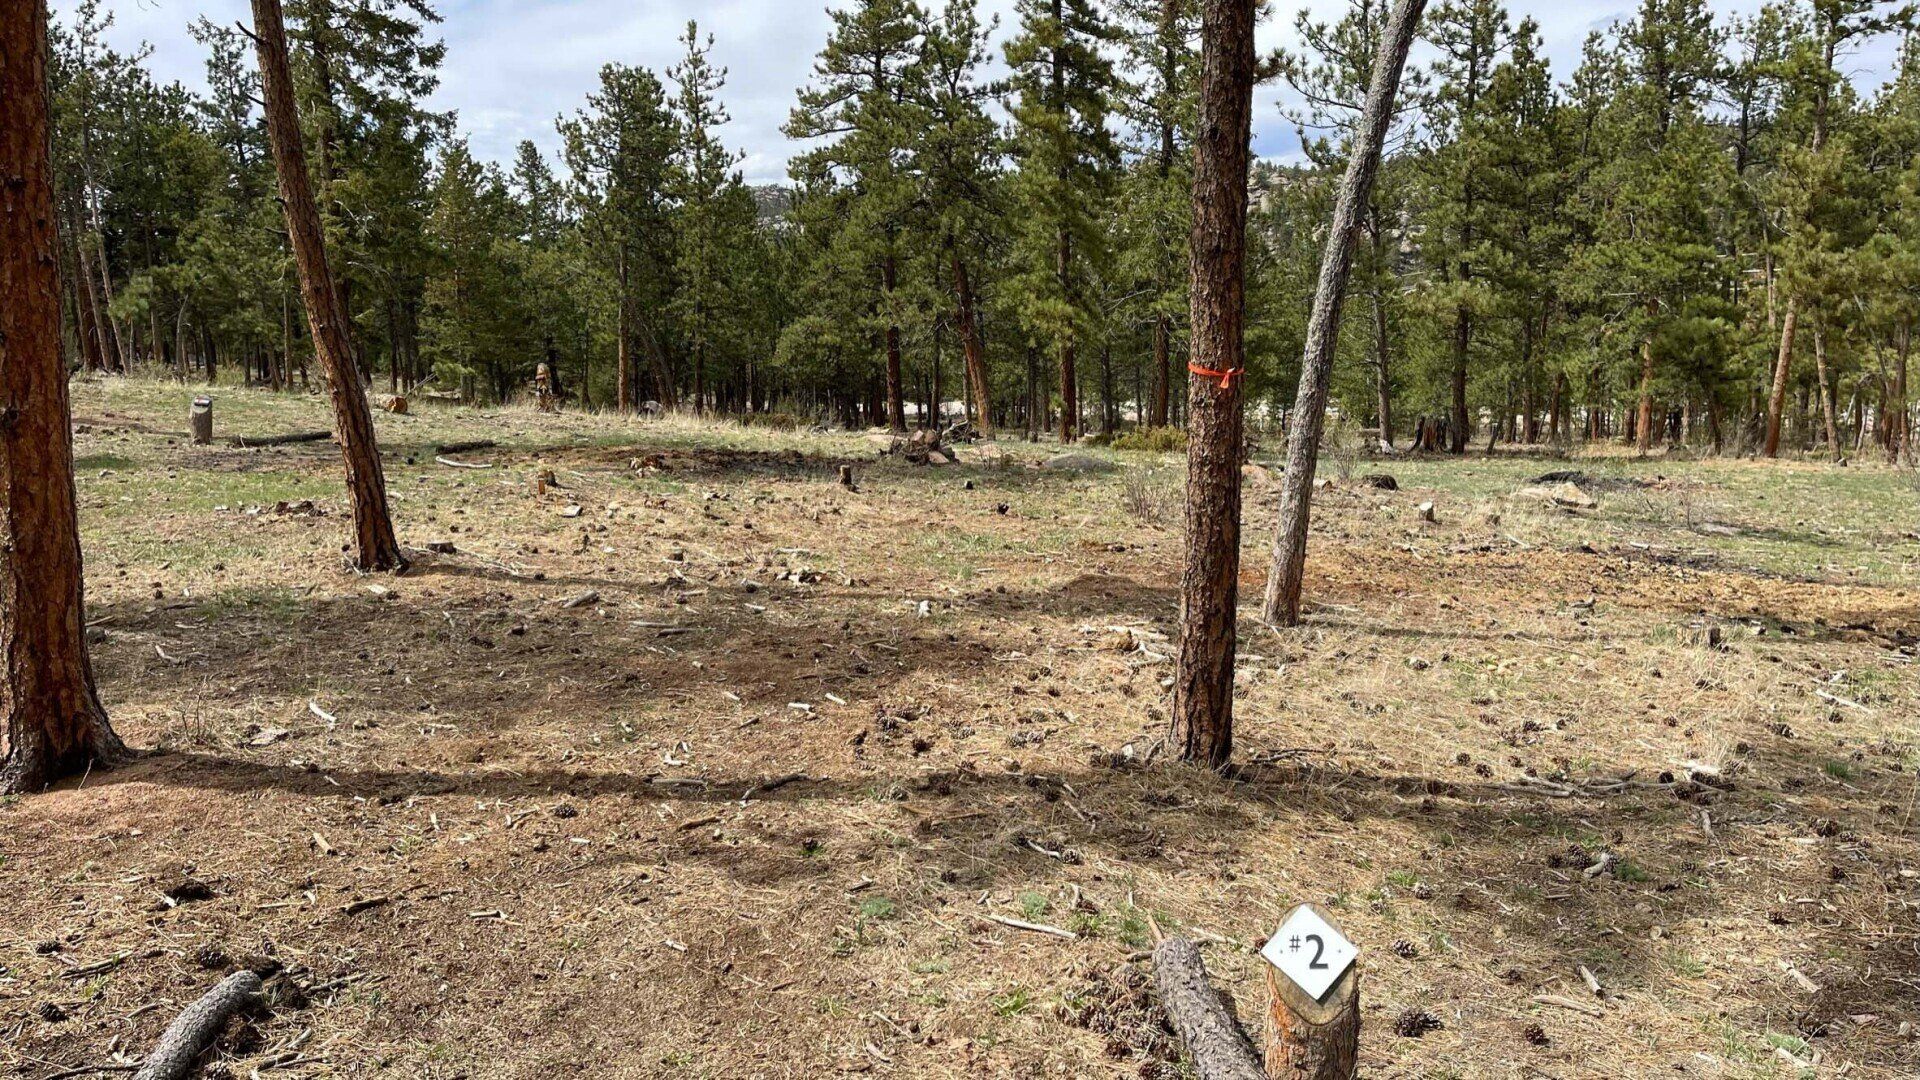 New Disc Golf Tee 2 at Sundance Trail Guest Ranch May 2022